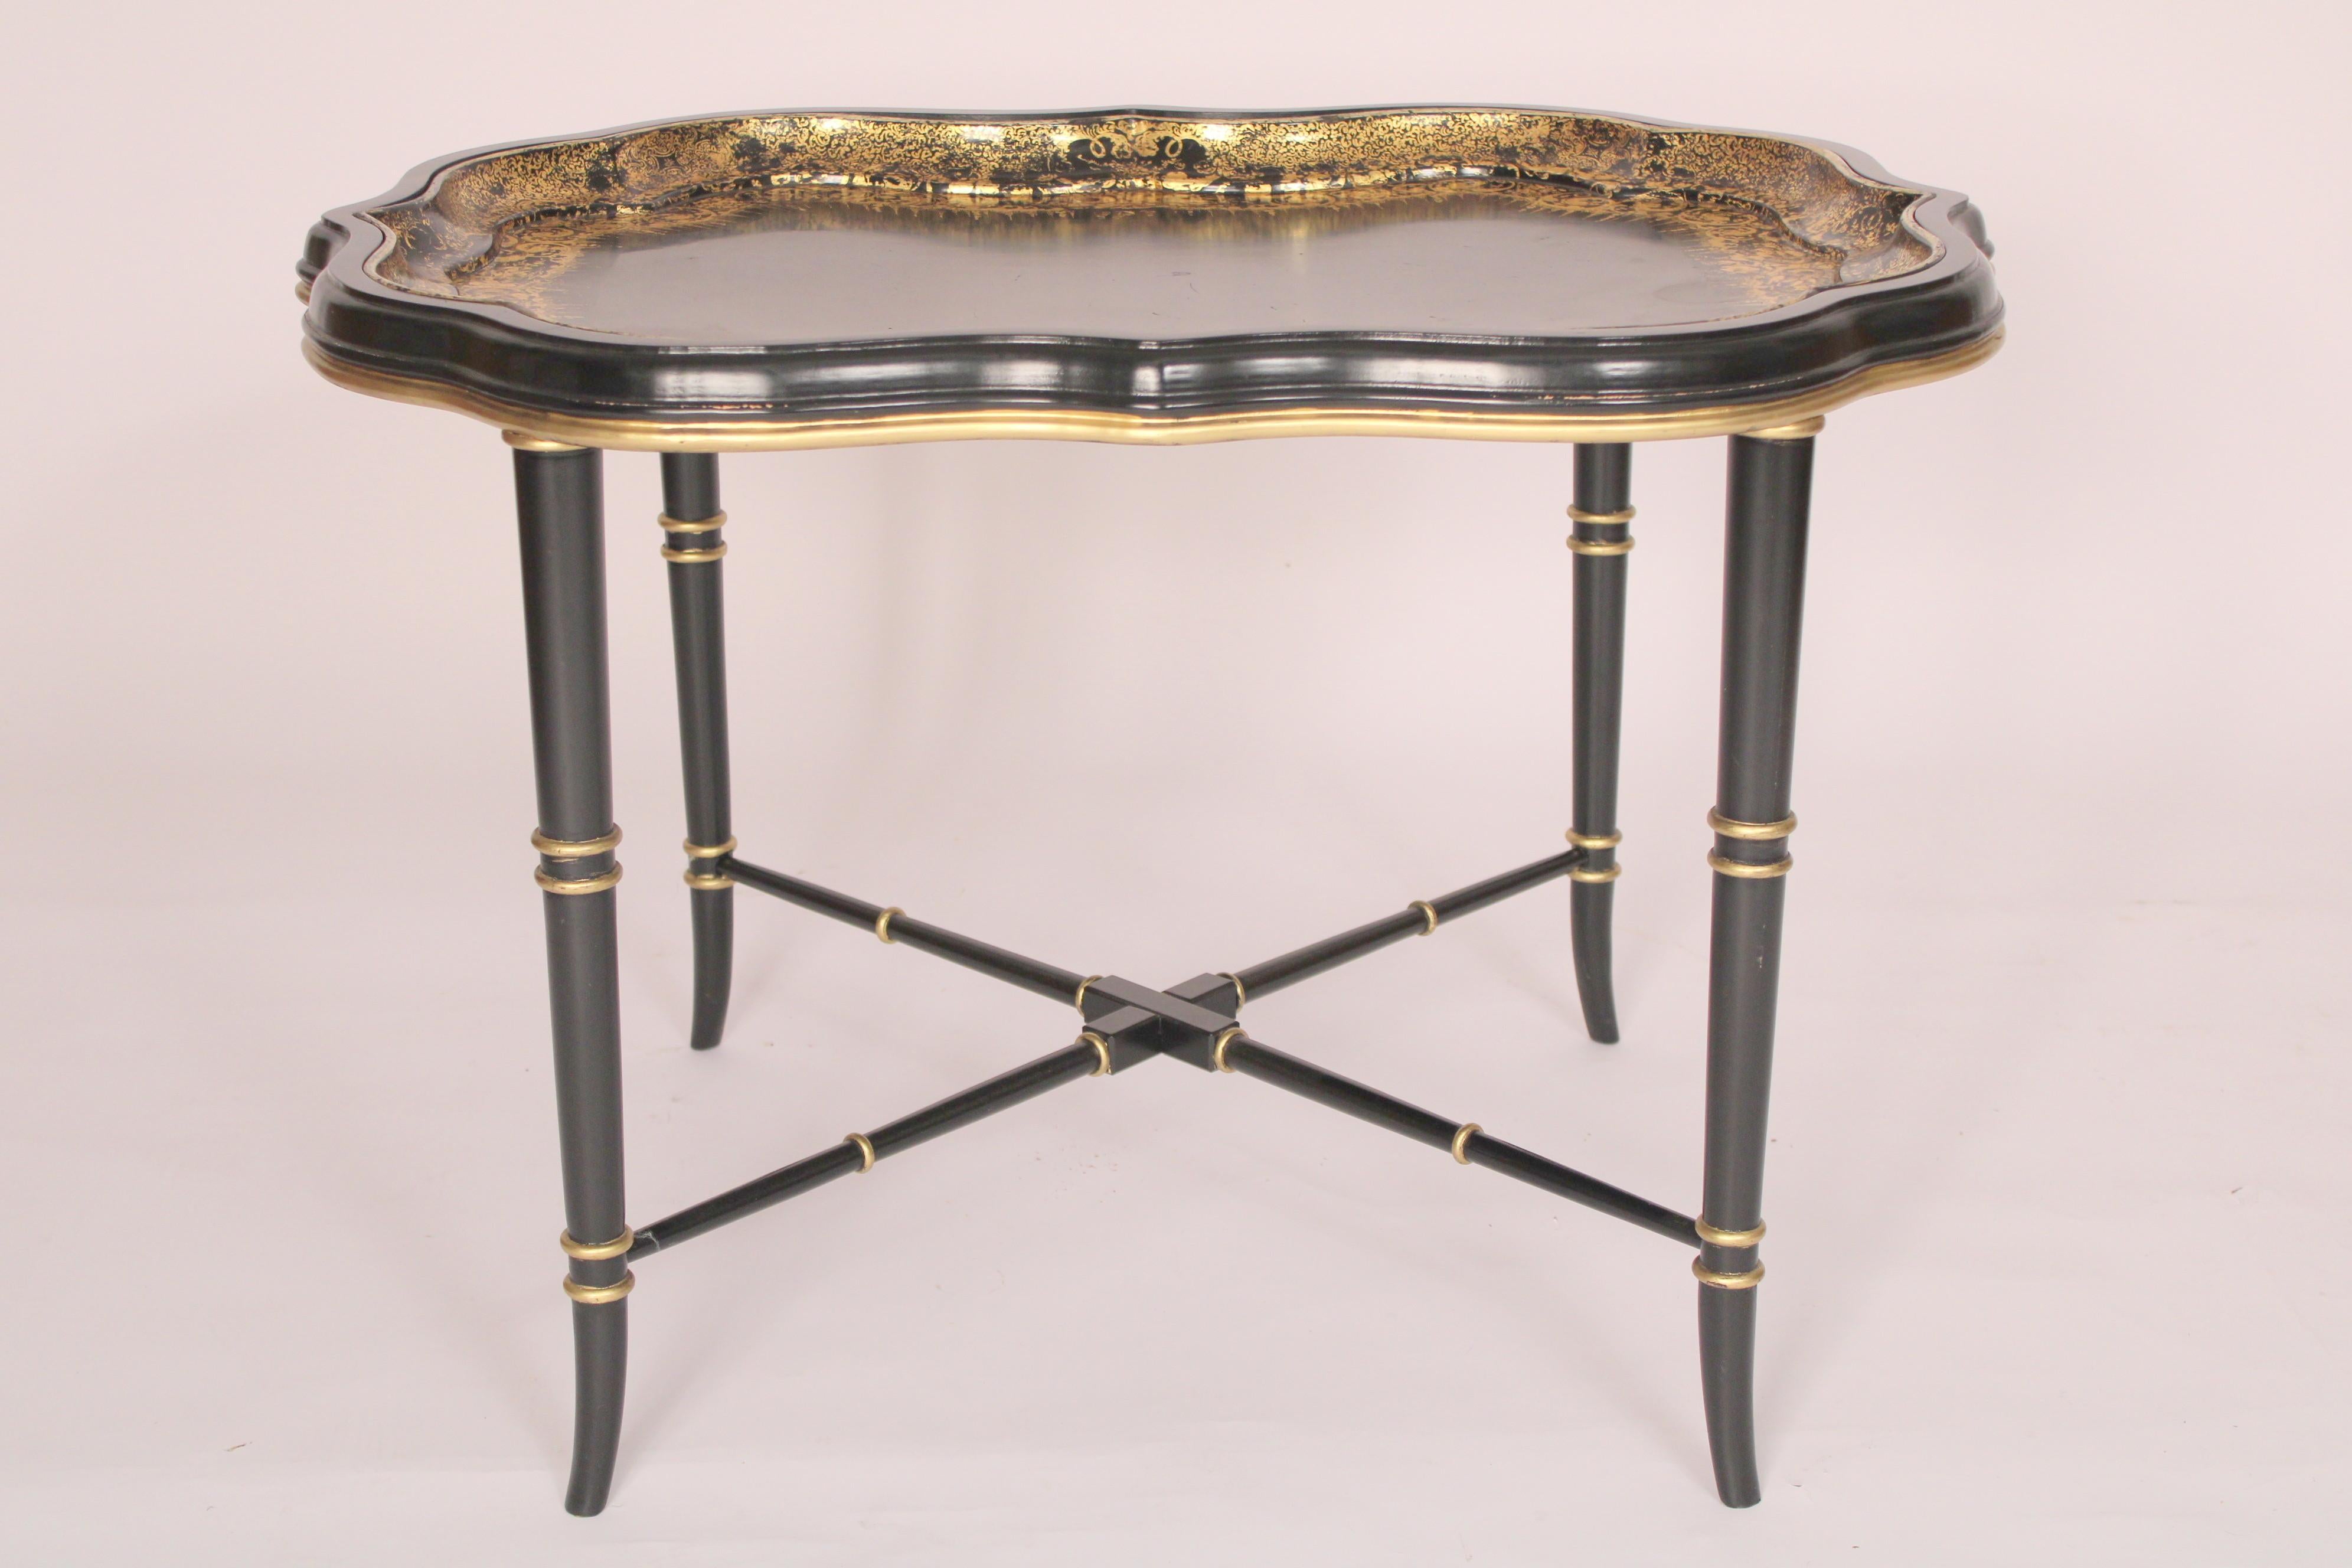 Antique English Regency style paper mache tray made by B. Watson & Co, circa 1900. Now on an English Regency wood, lacquer and painted stand made circa late 20th century.